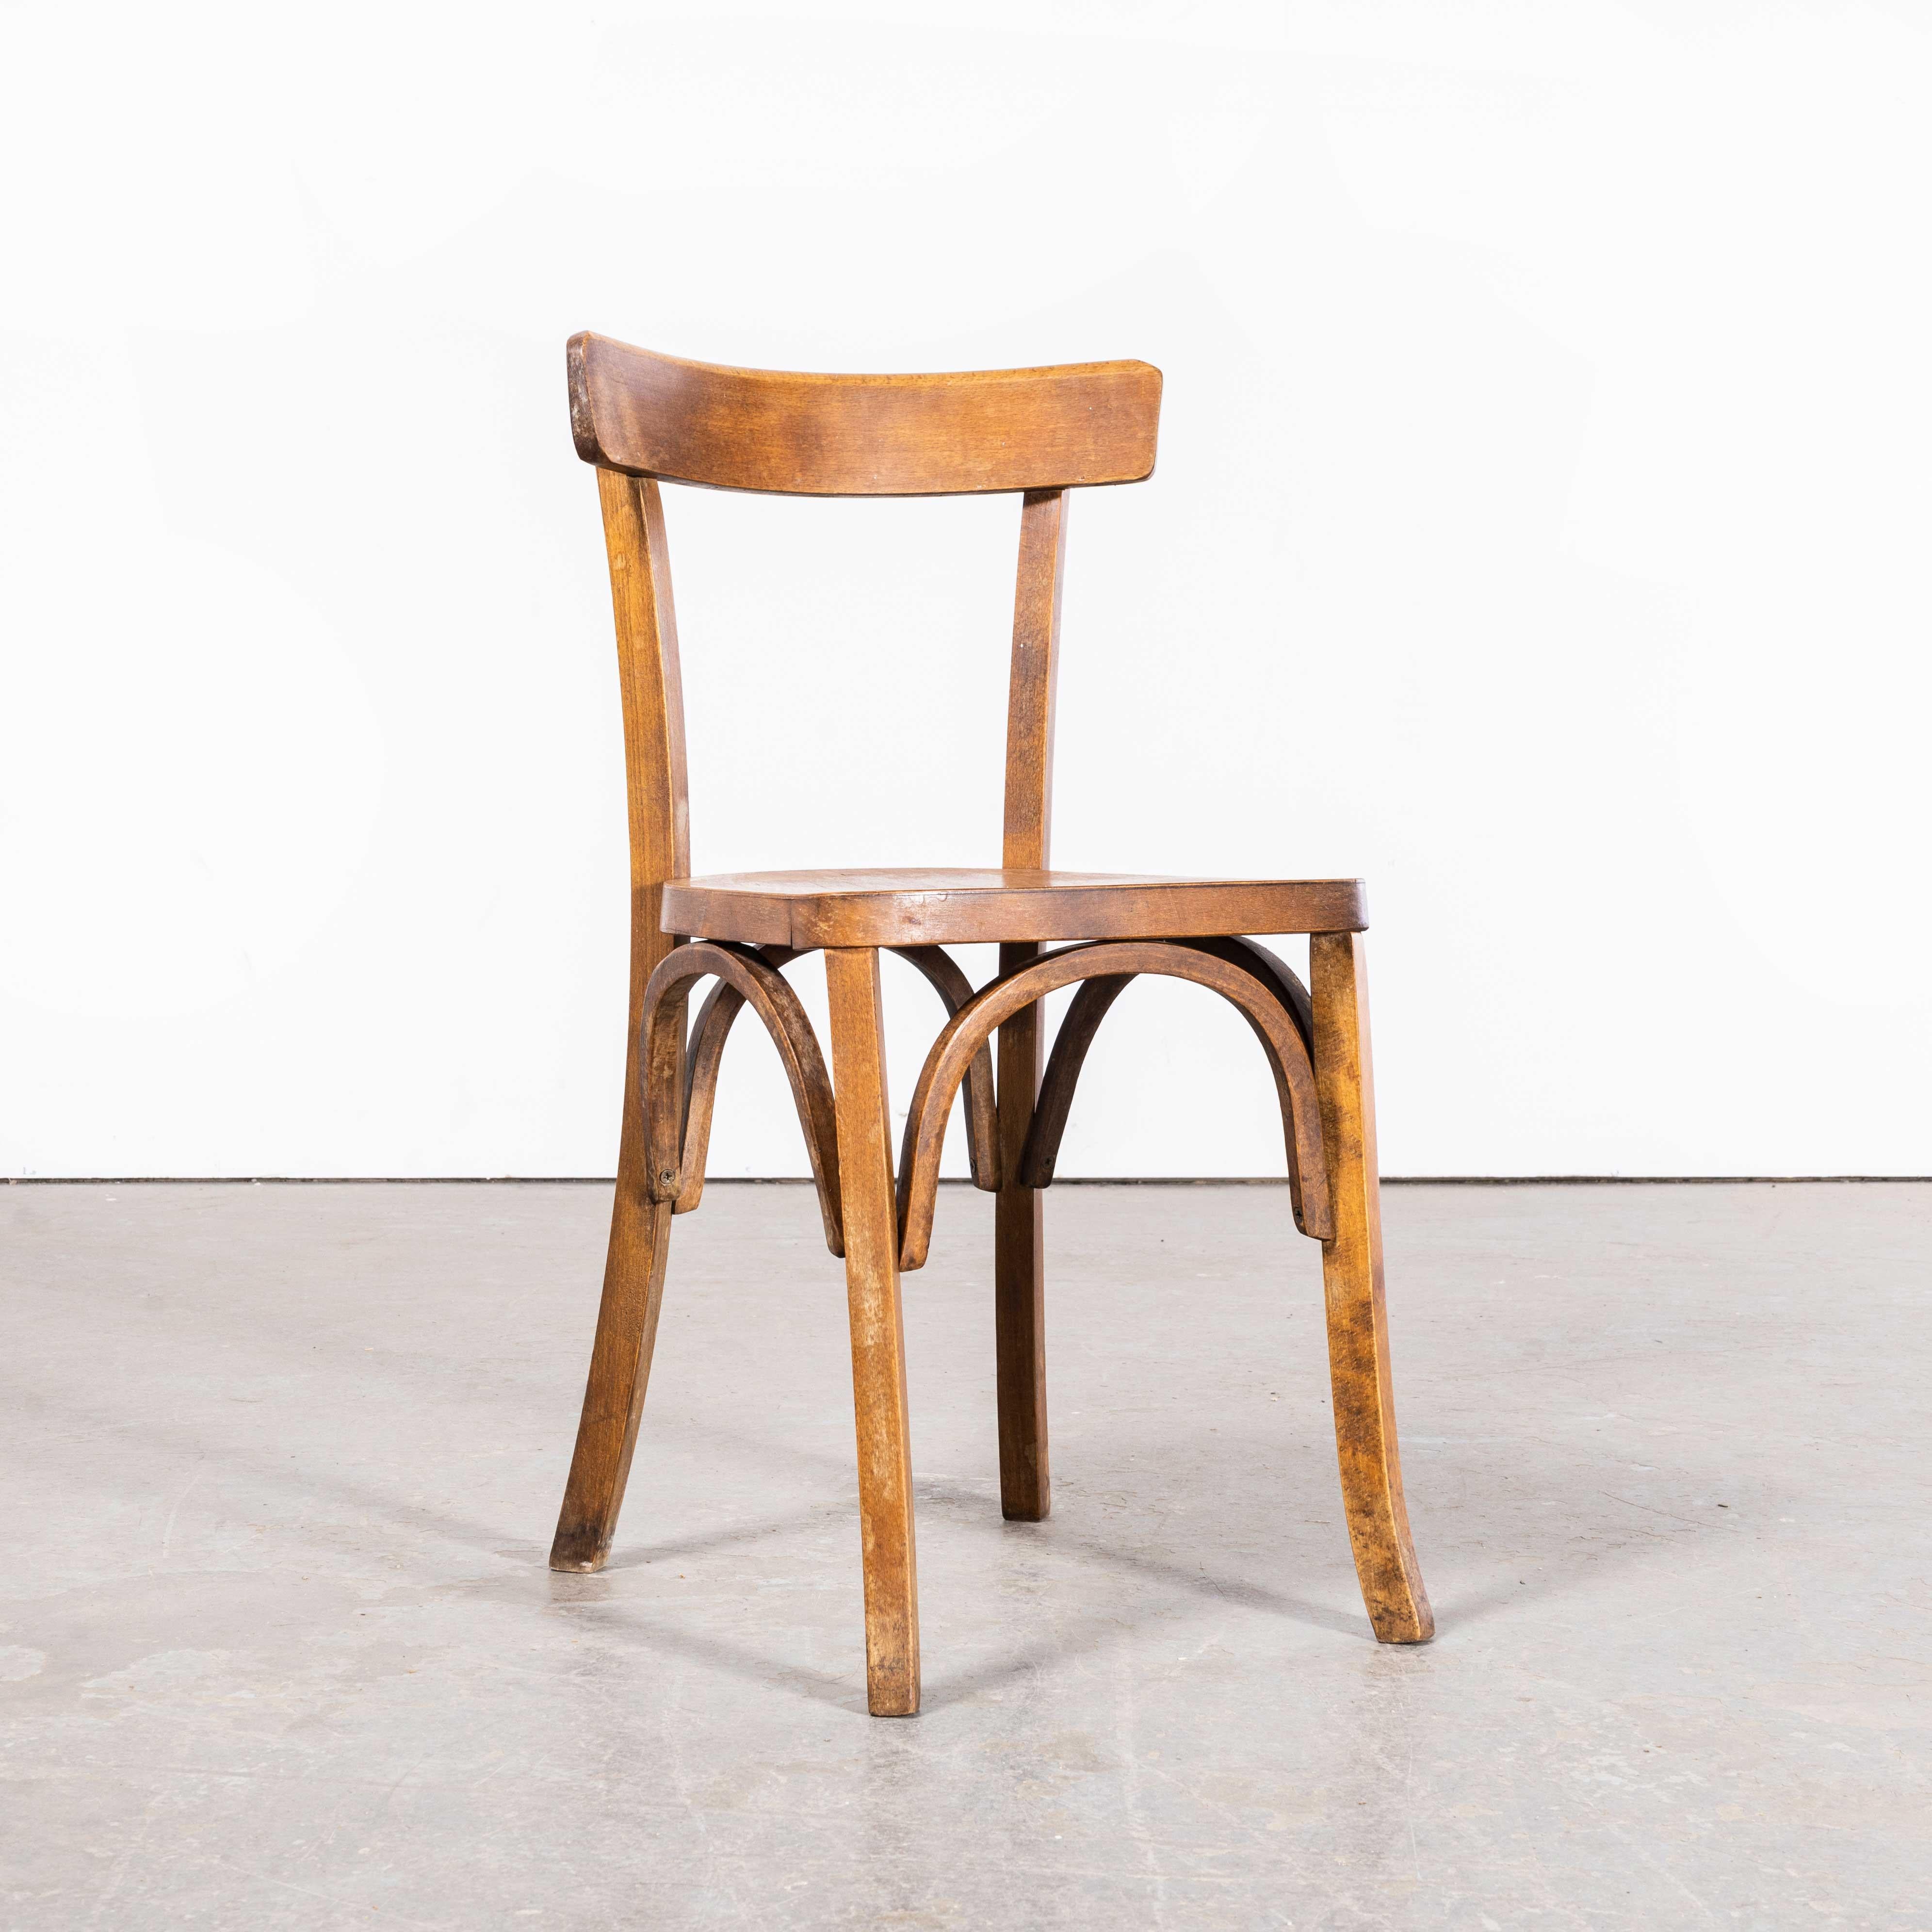 1950’s Fischel French Slim Back Bentwood Dining Chairs – Set Of Five
1950’s Fischel French Slim Back Bentwood Dining Chairs – Set Of Five. The process of steam bending beech to create elegant chairs was discovered and developed by Thonet, but when